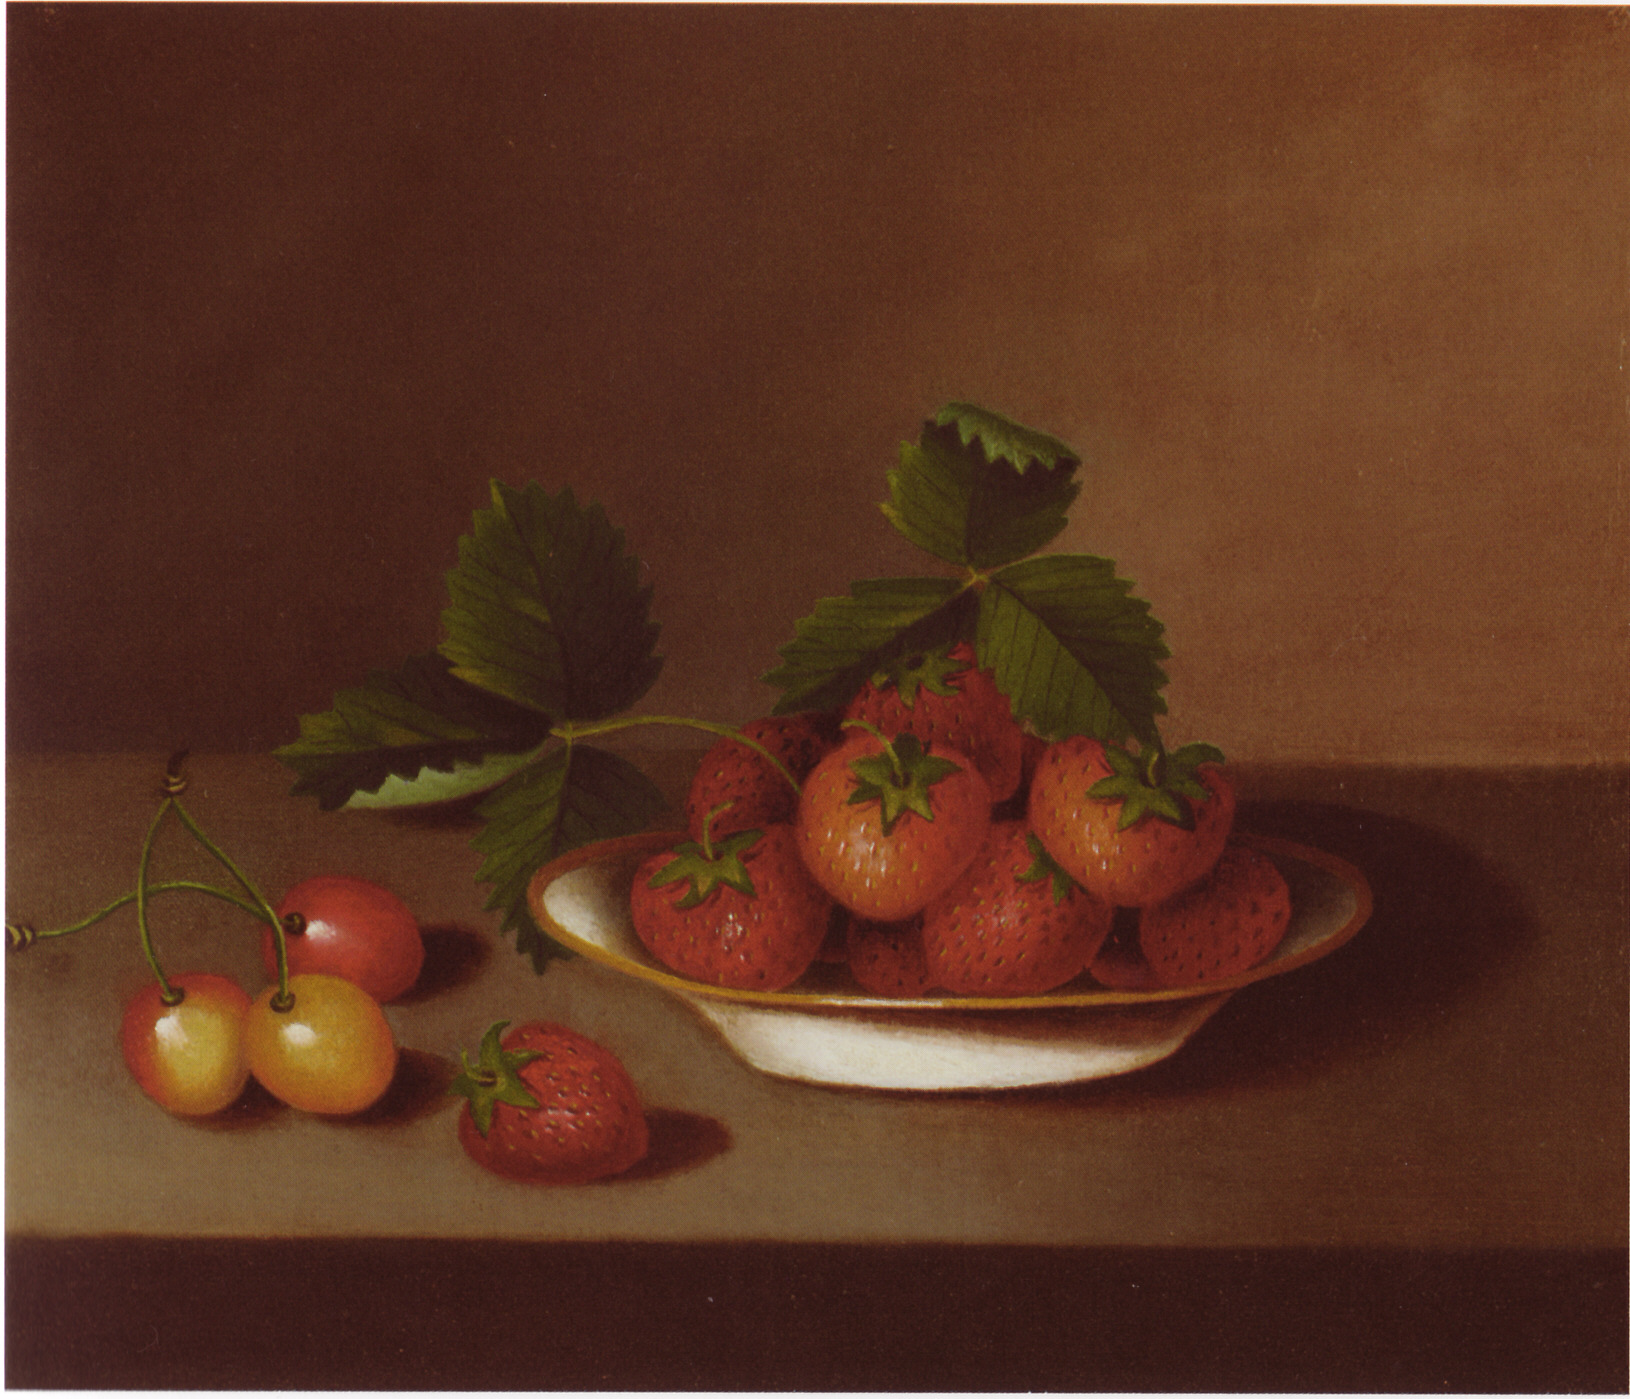 Strawberries and Cherries by Margaretta Peale - c. 1813-1830 - 25.6 x 30.8 cm Pennsylvania Academy of the Fine Arts